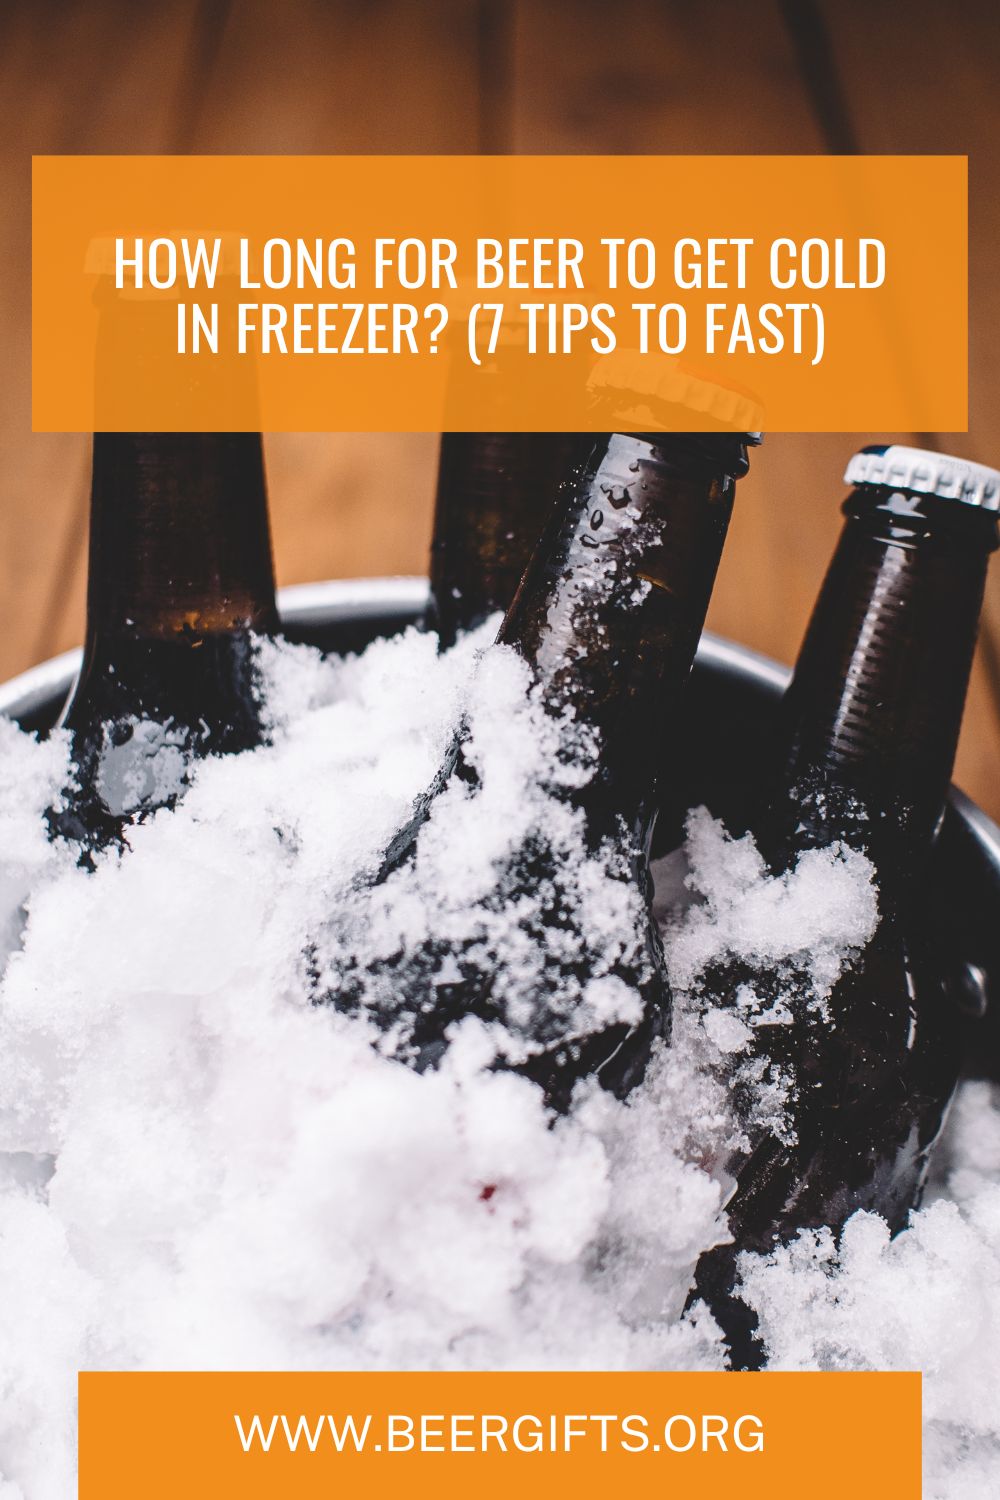 How Long for Beer to get Cold in Freezer 1